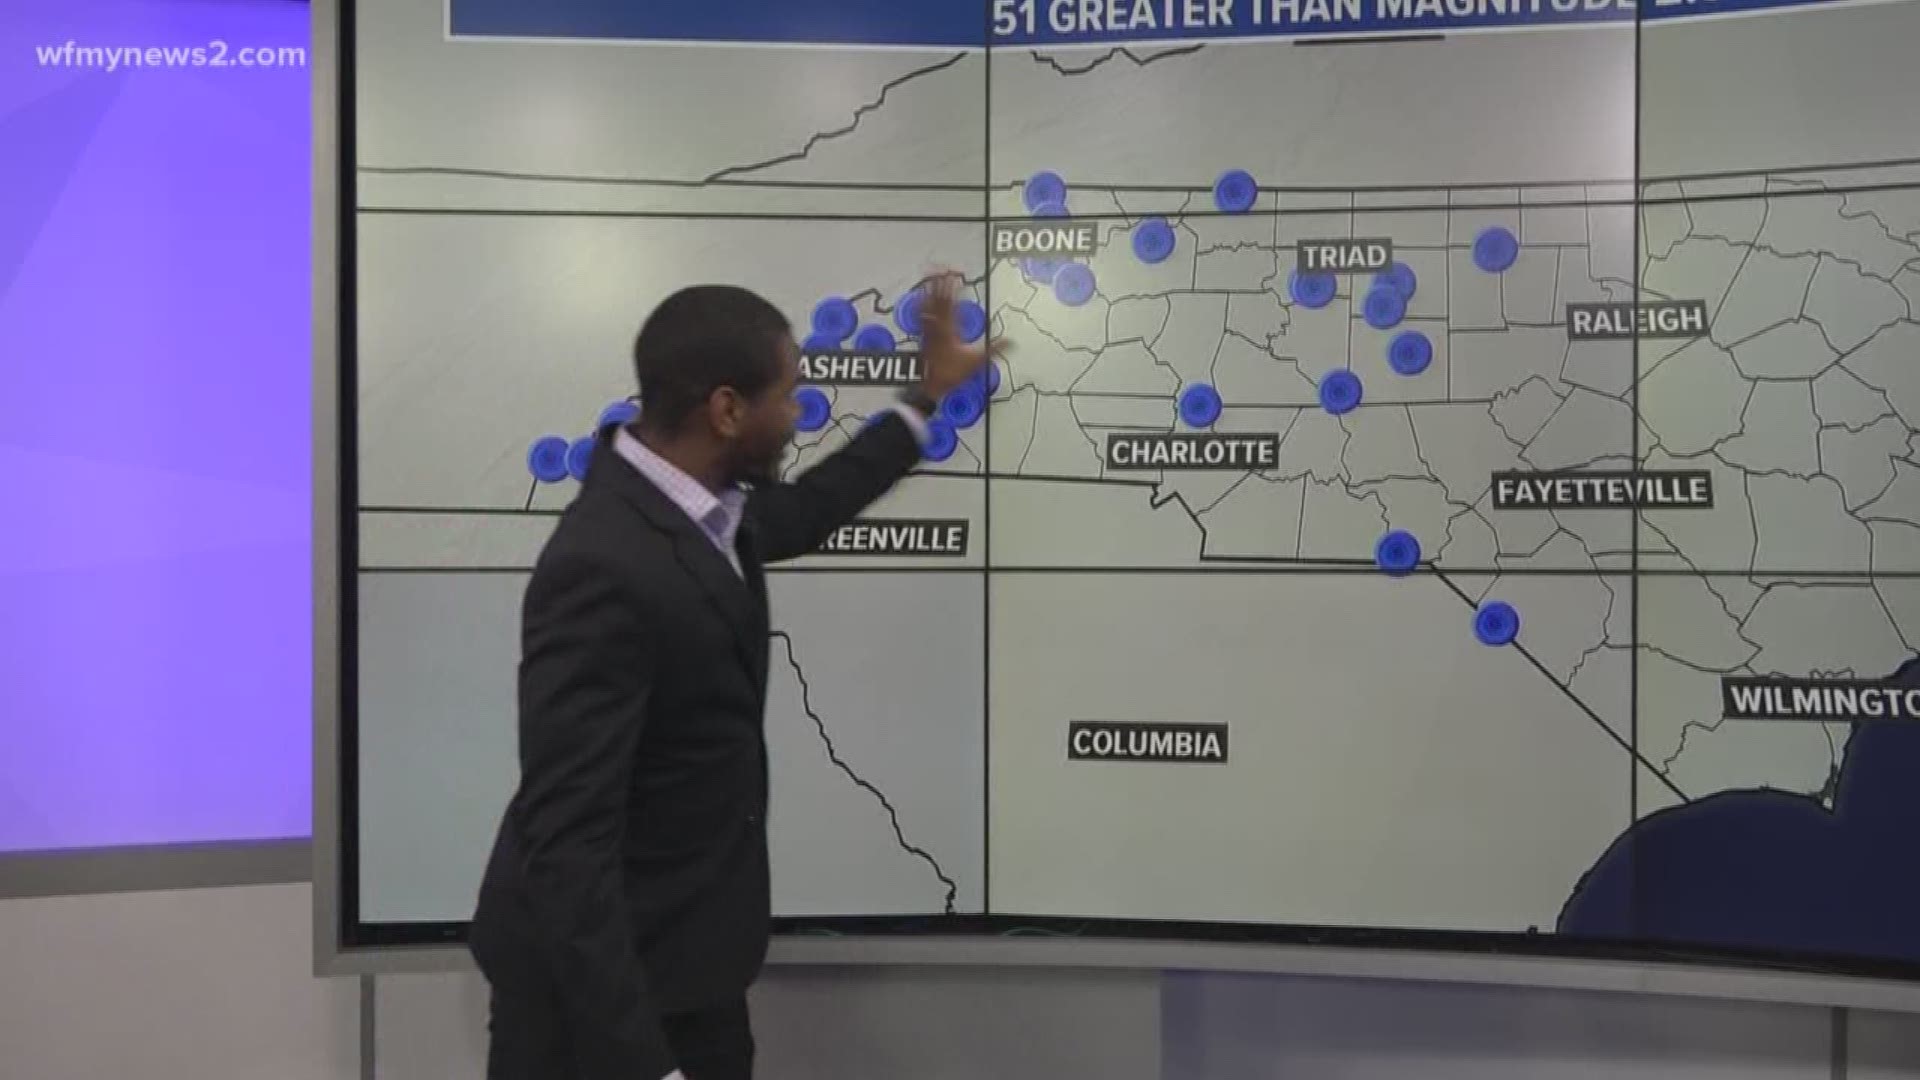 Here's a look at the history of earthquakes in the Triad.